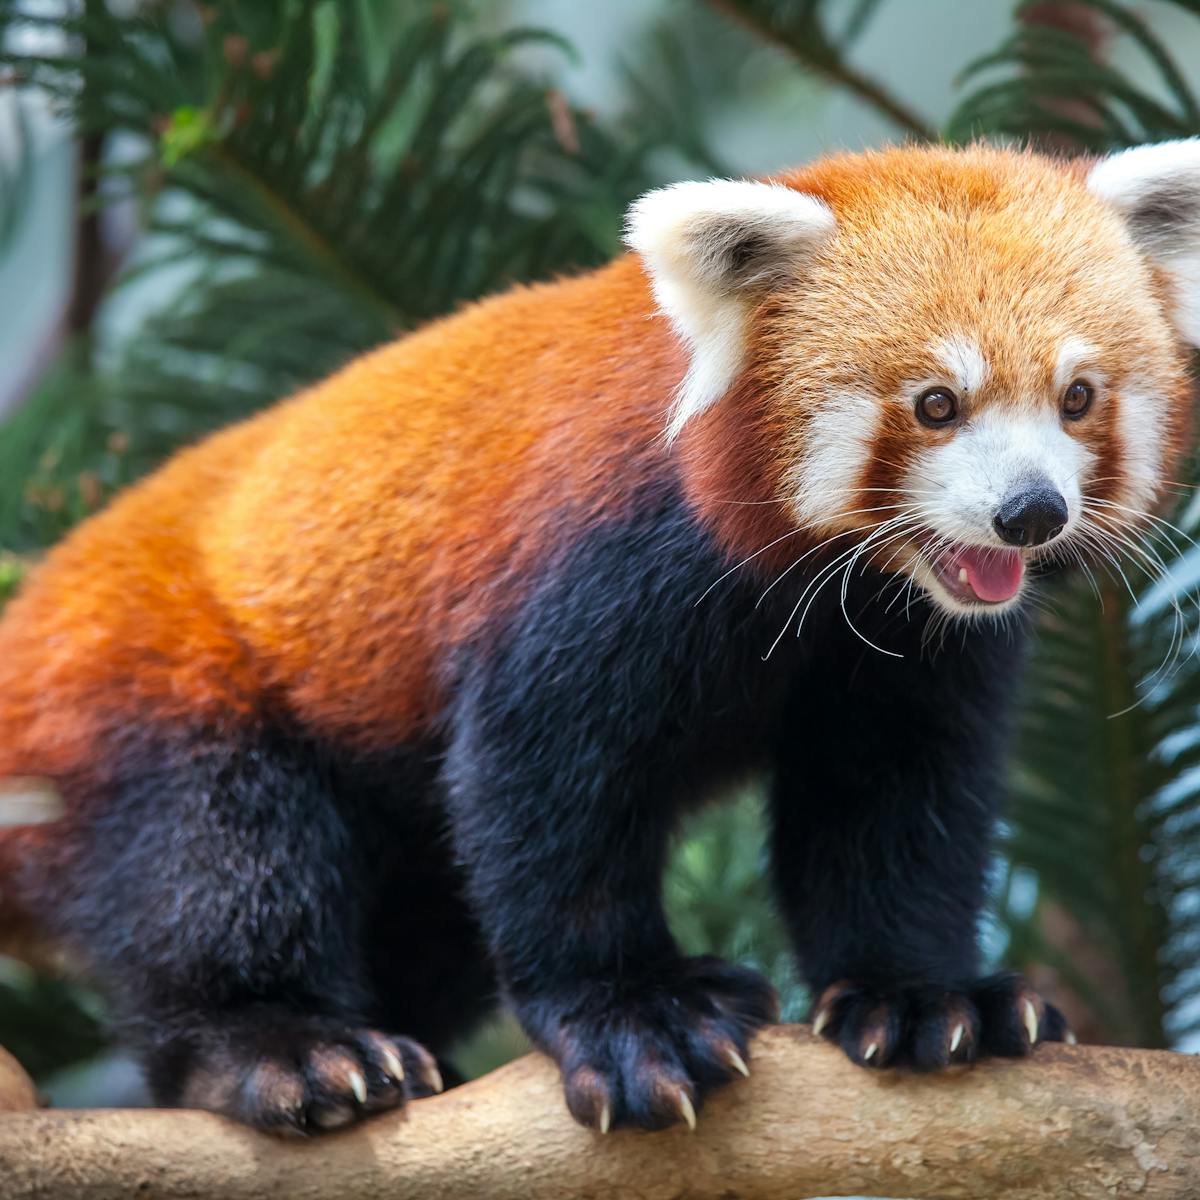 Red pandas may be two different species - raises some tough questions for conservation